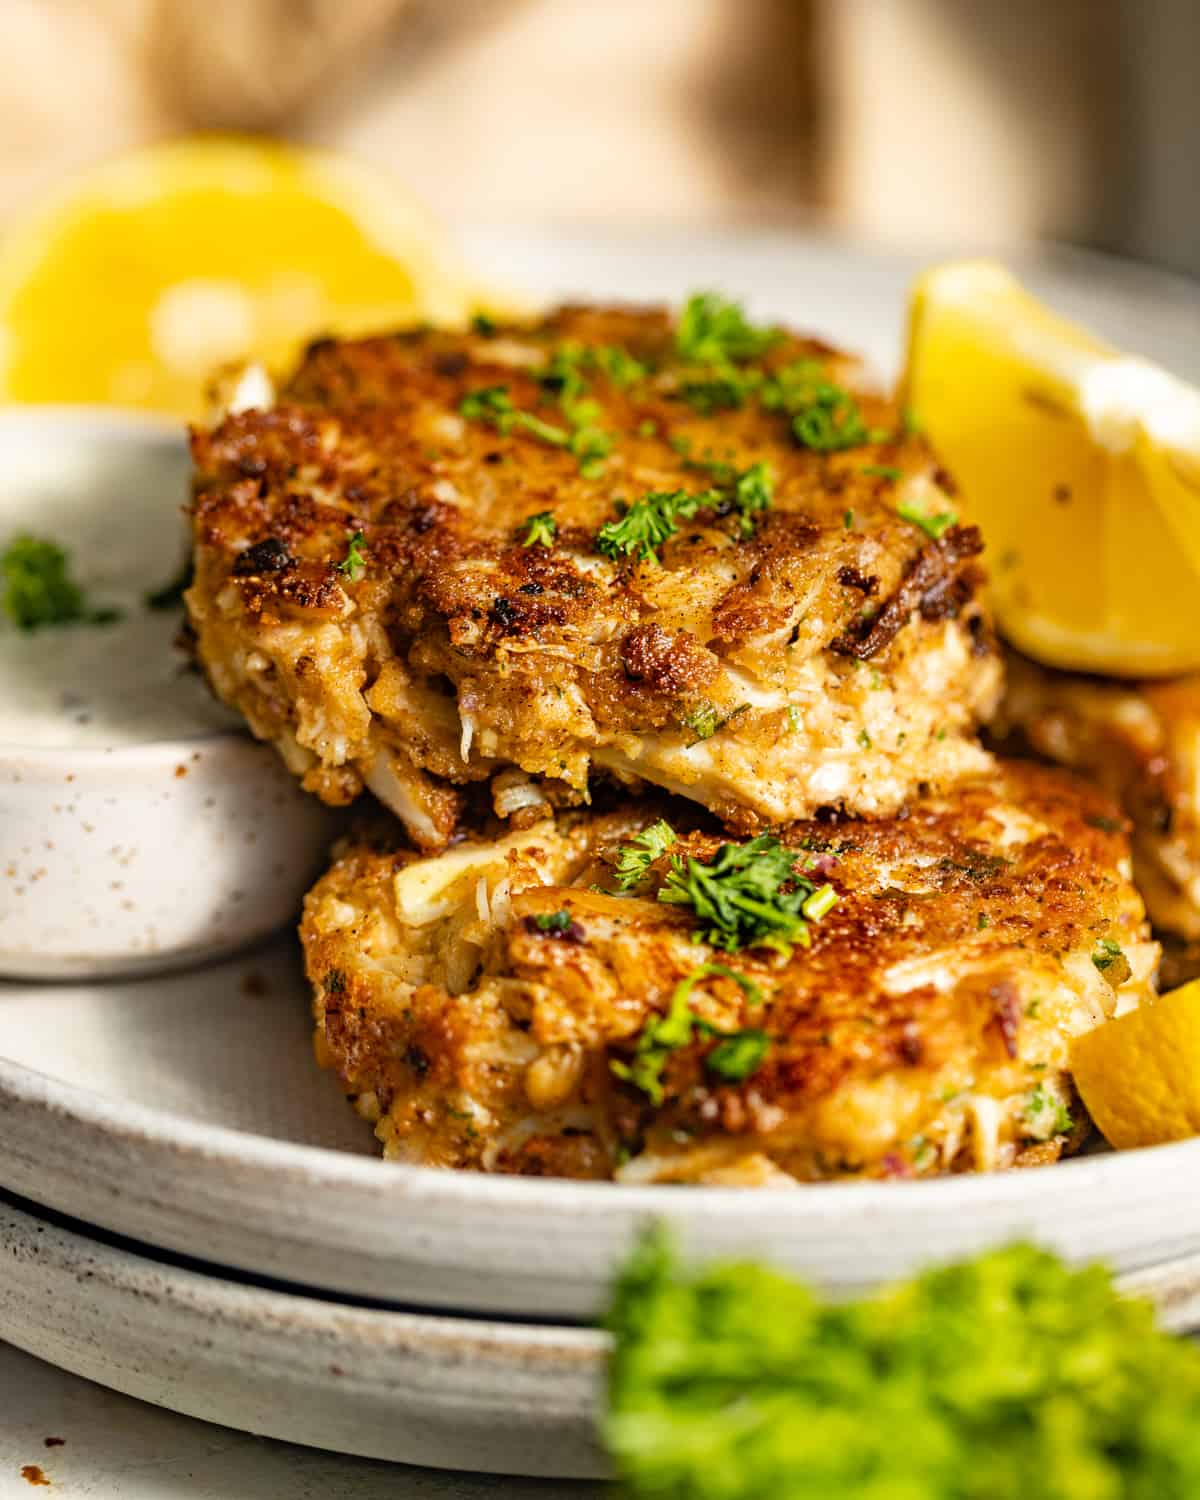 Pan fried crab cakes stacked on a dinner plate with lemon wedges.